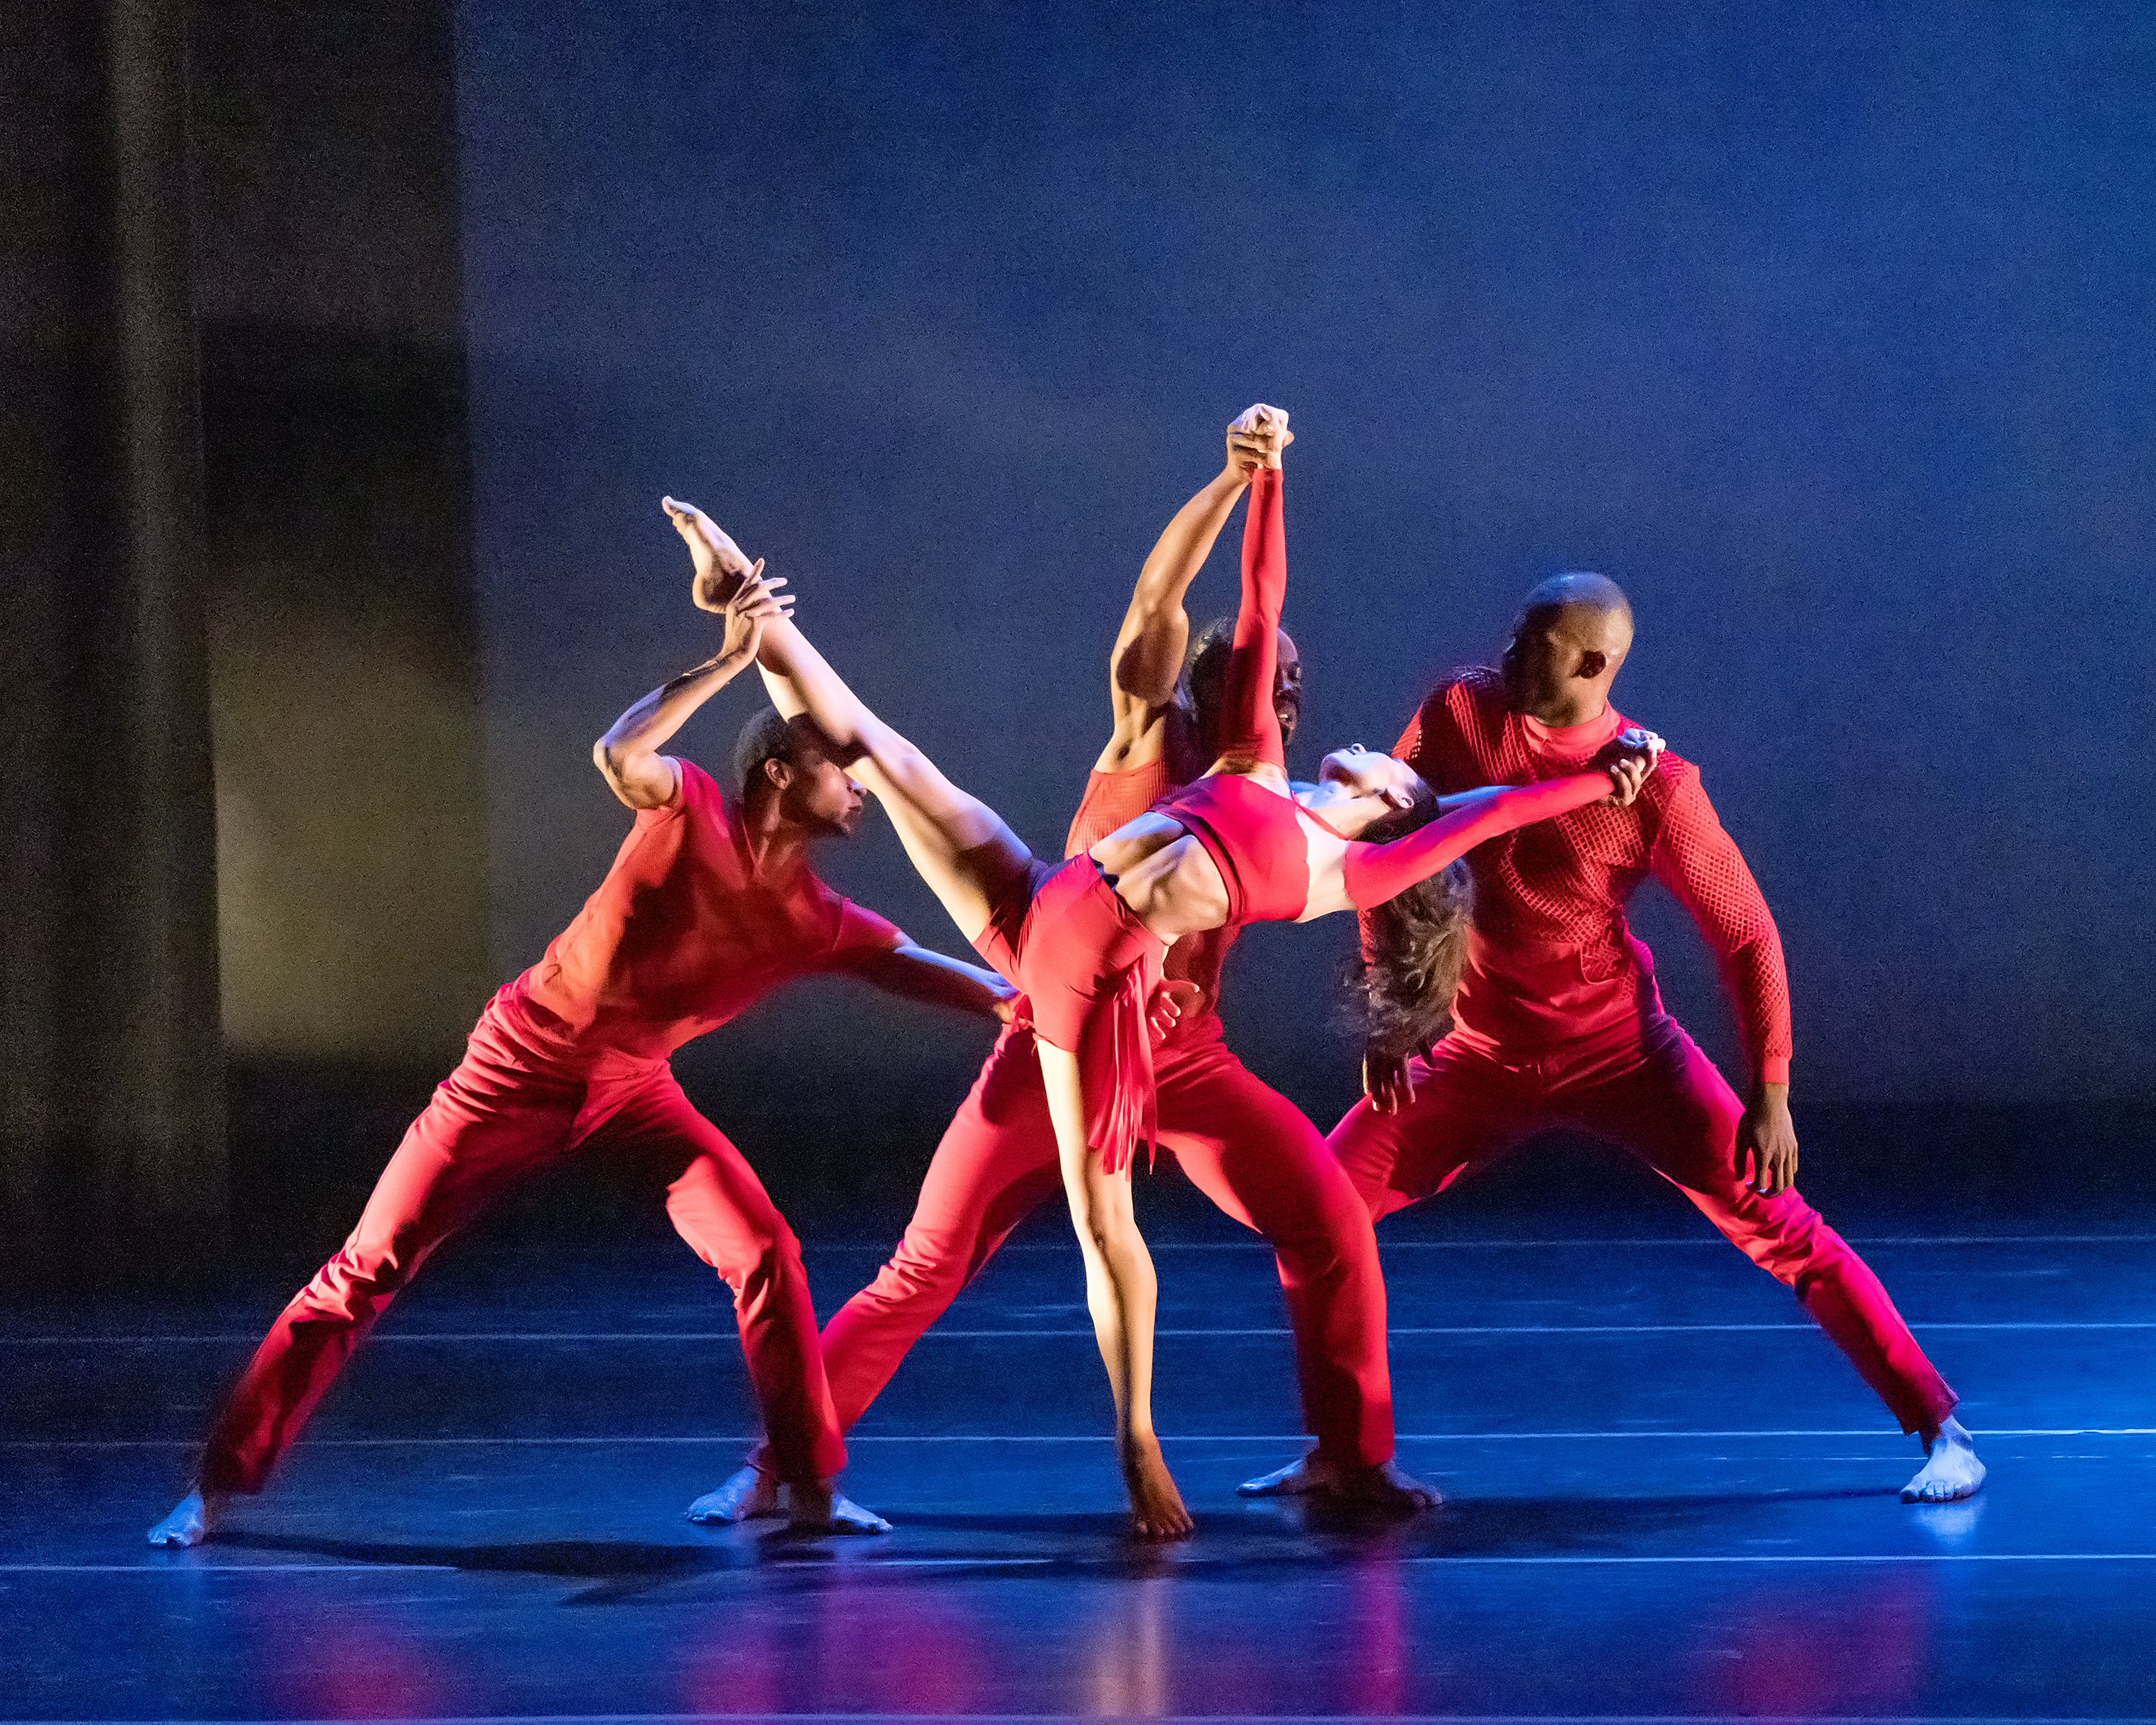 Four dancers dressed in red against a blue-lit background